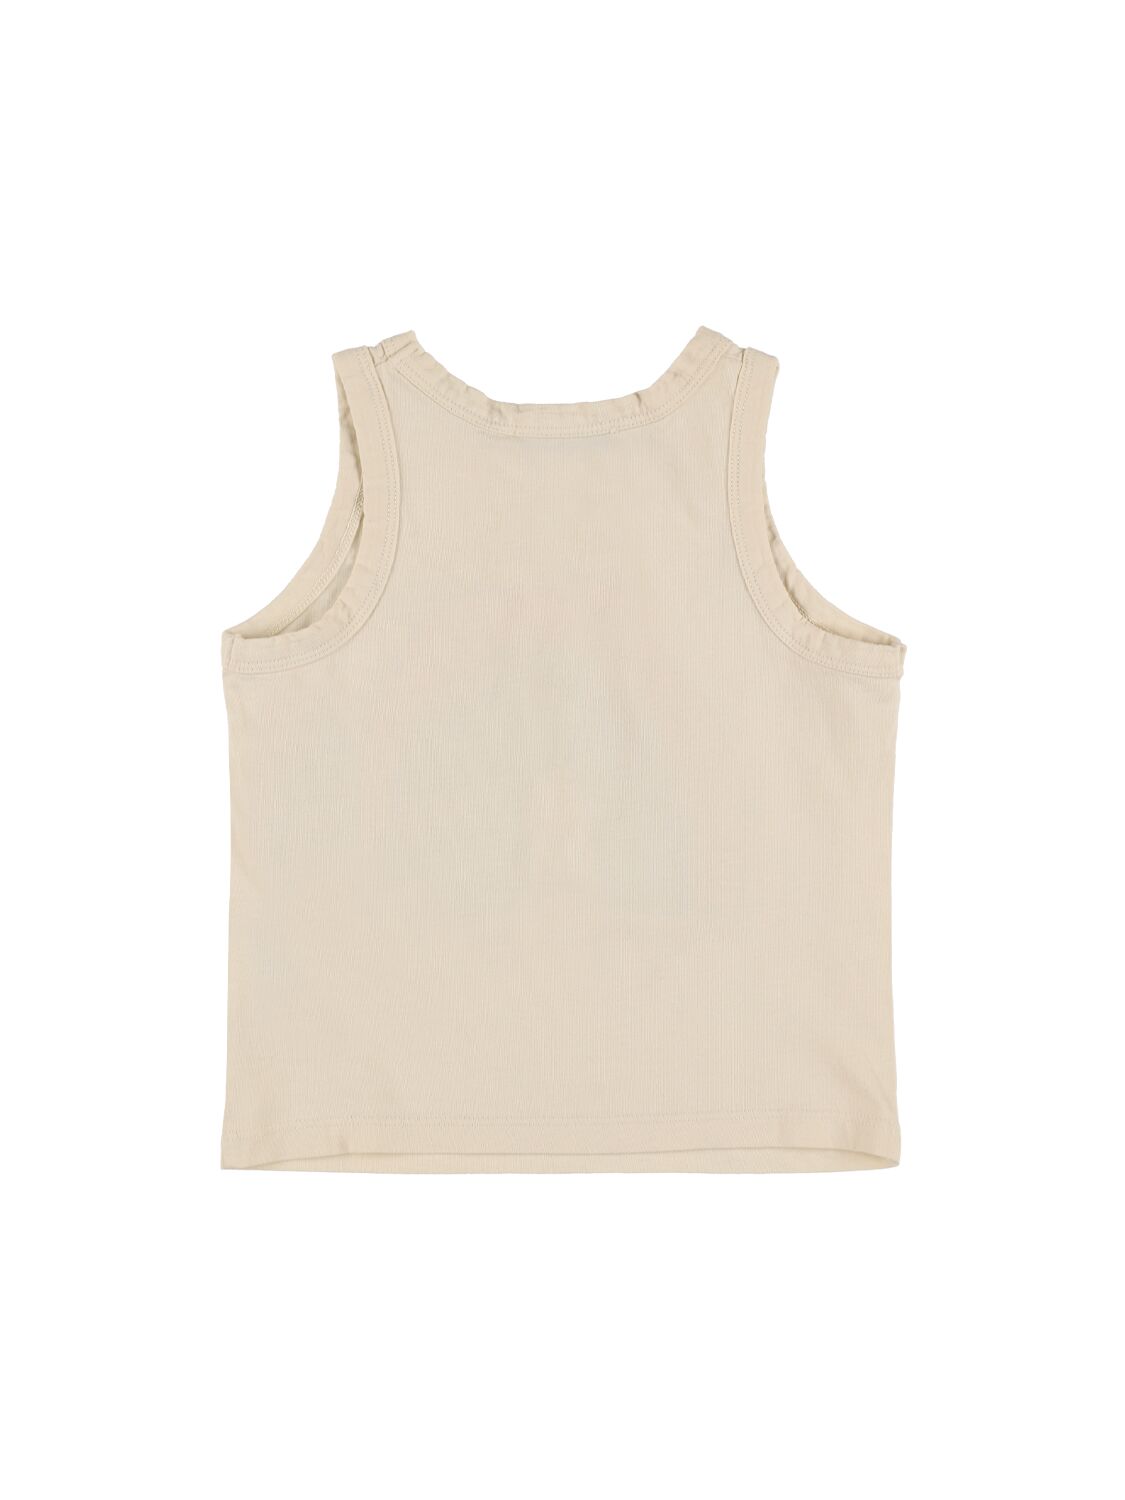 Shop Bobo Choses Printed Cotton Tank Top In Off-white